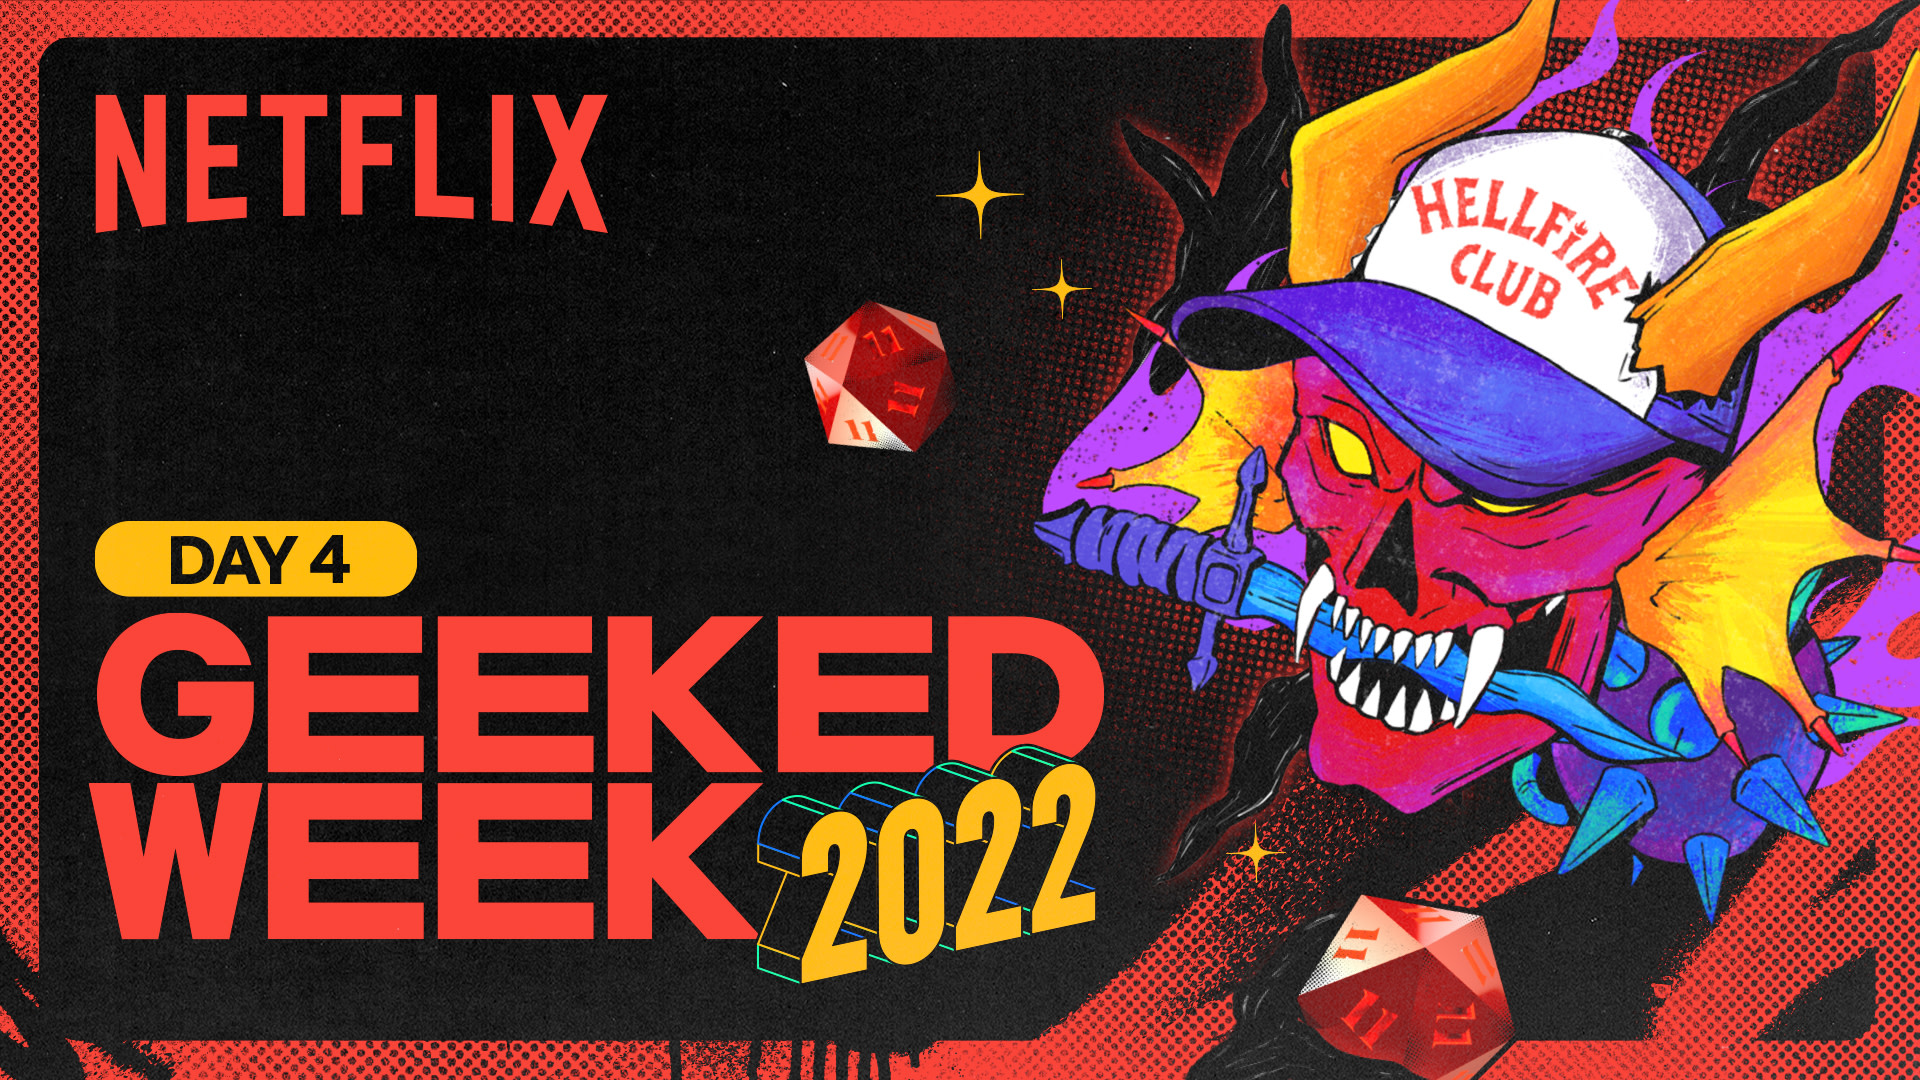 Stranger Things Day 2022: Our Complete Preview Guide - About Netflix